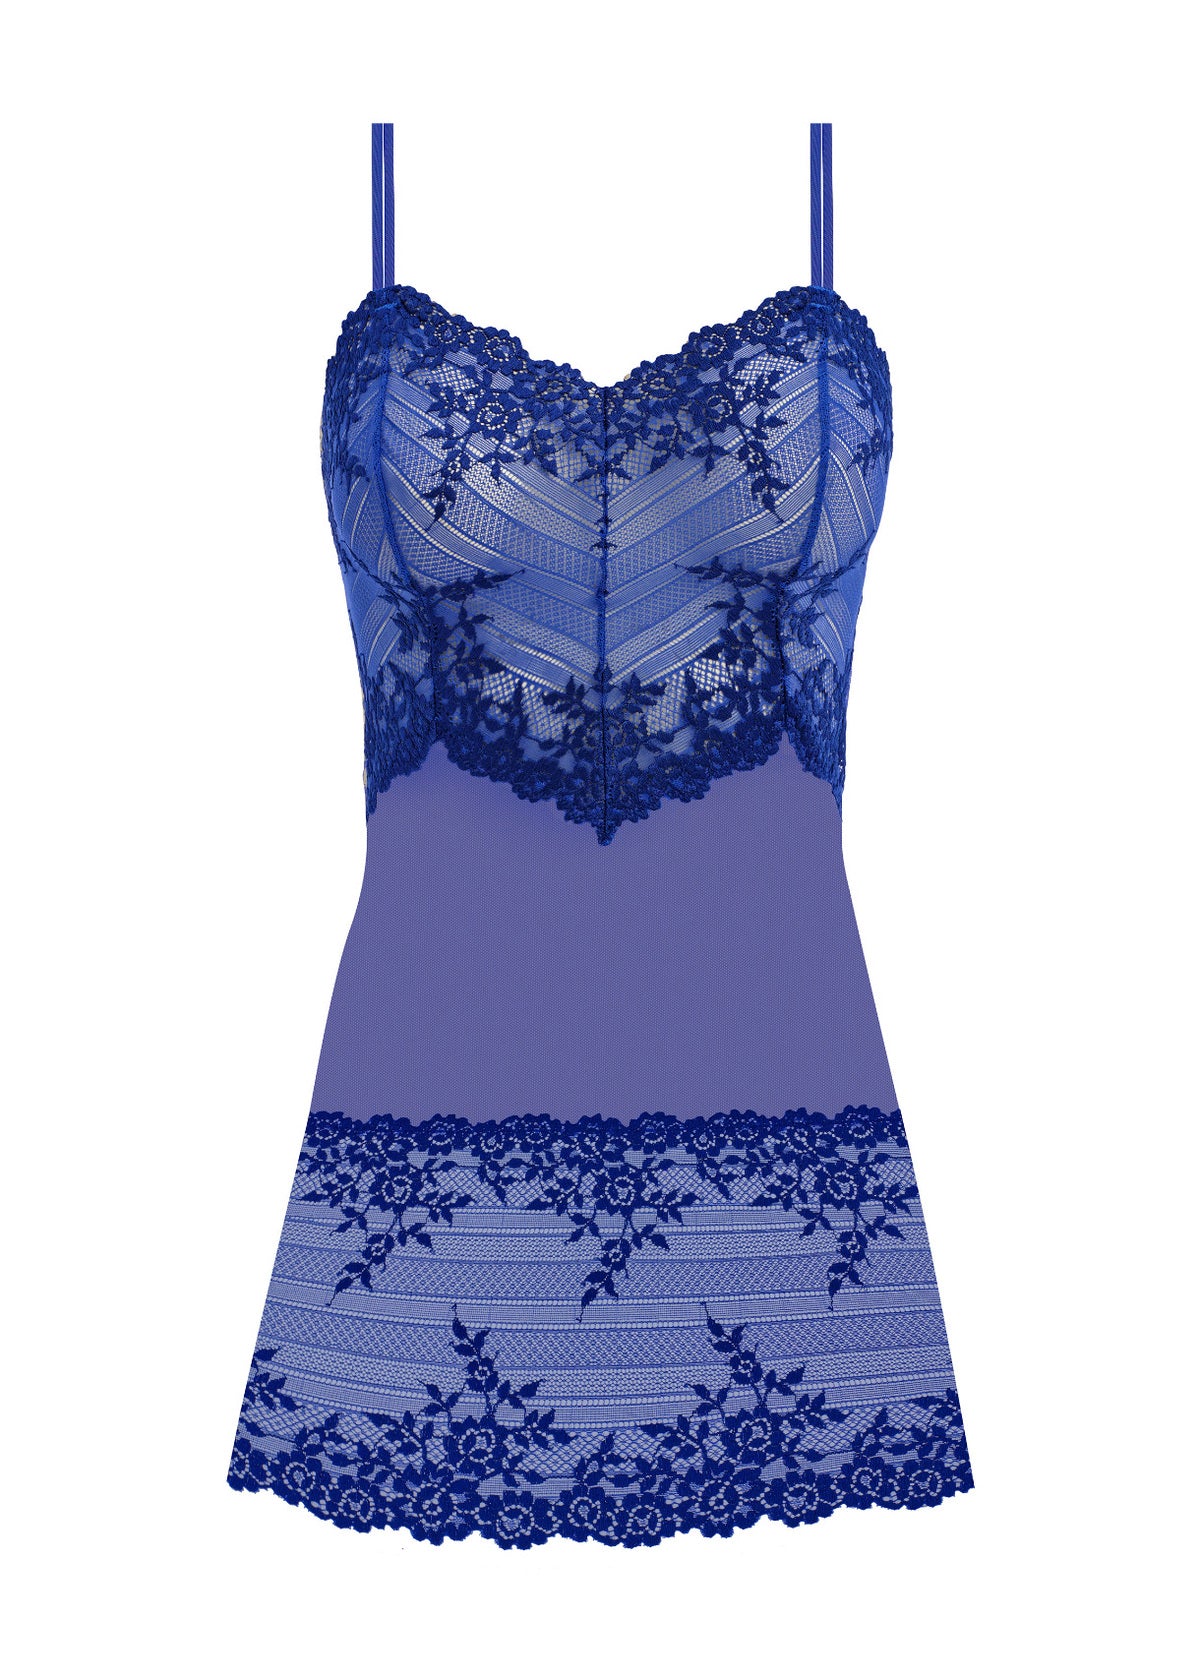 Wacoal Embrace Lace Chemise - Beaucoup Blue / Bellwether Blue